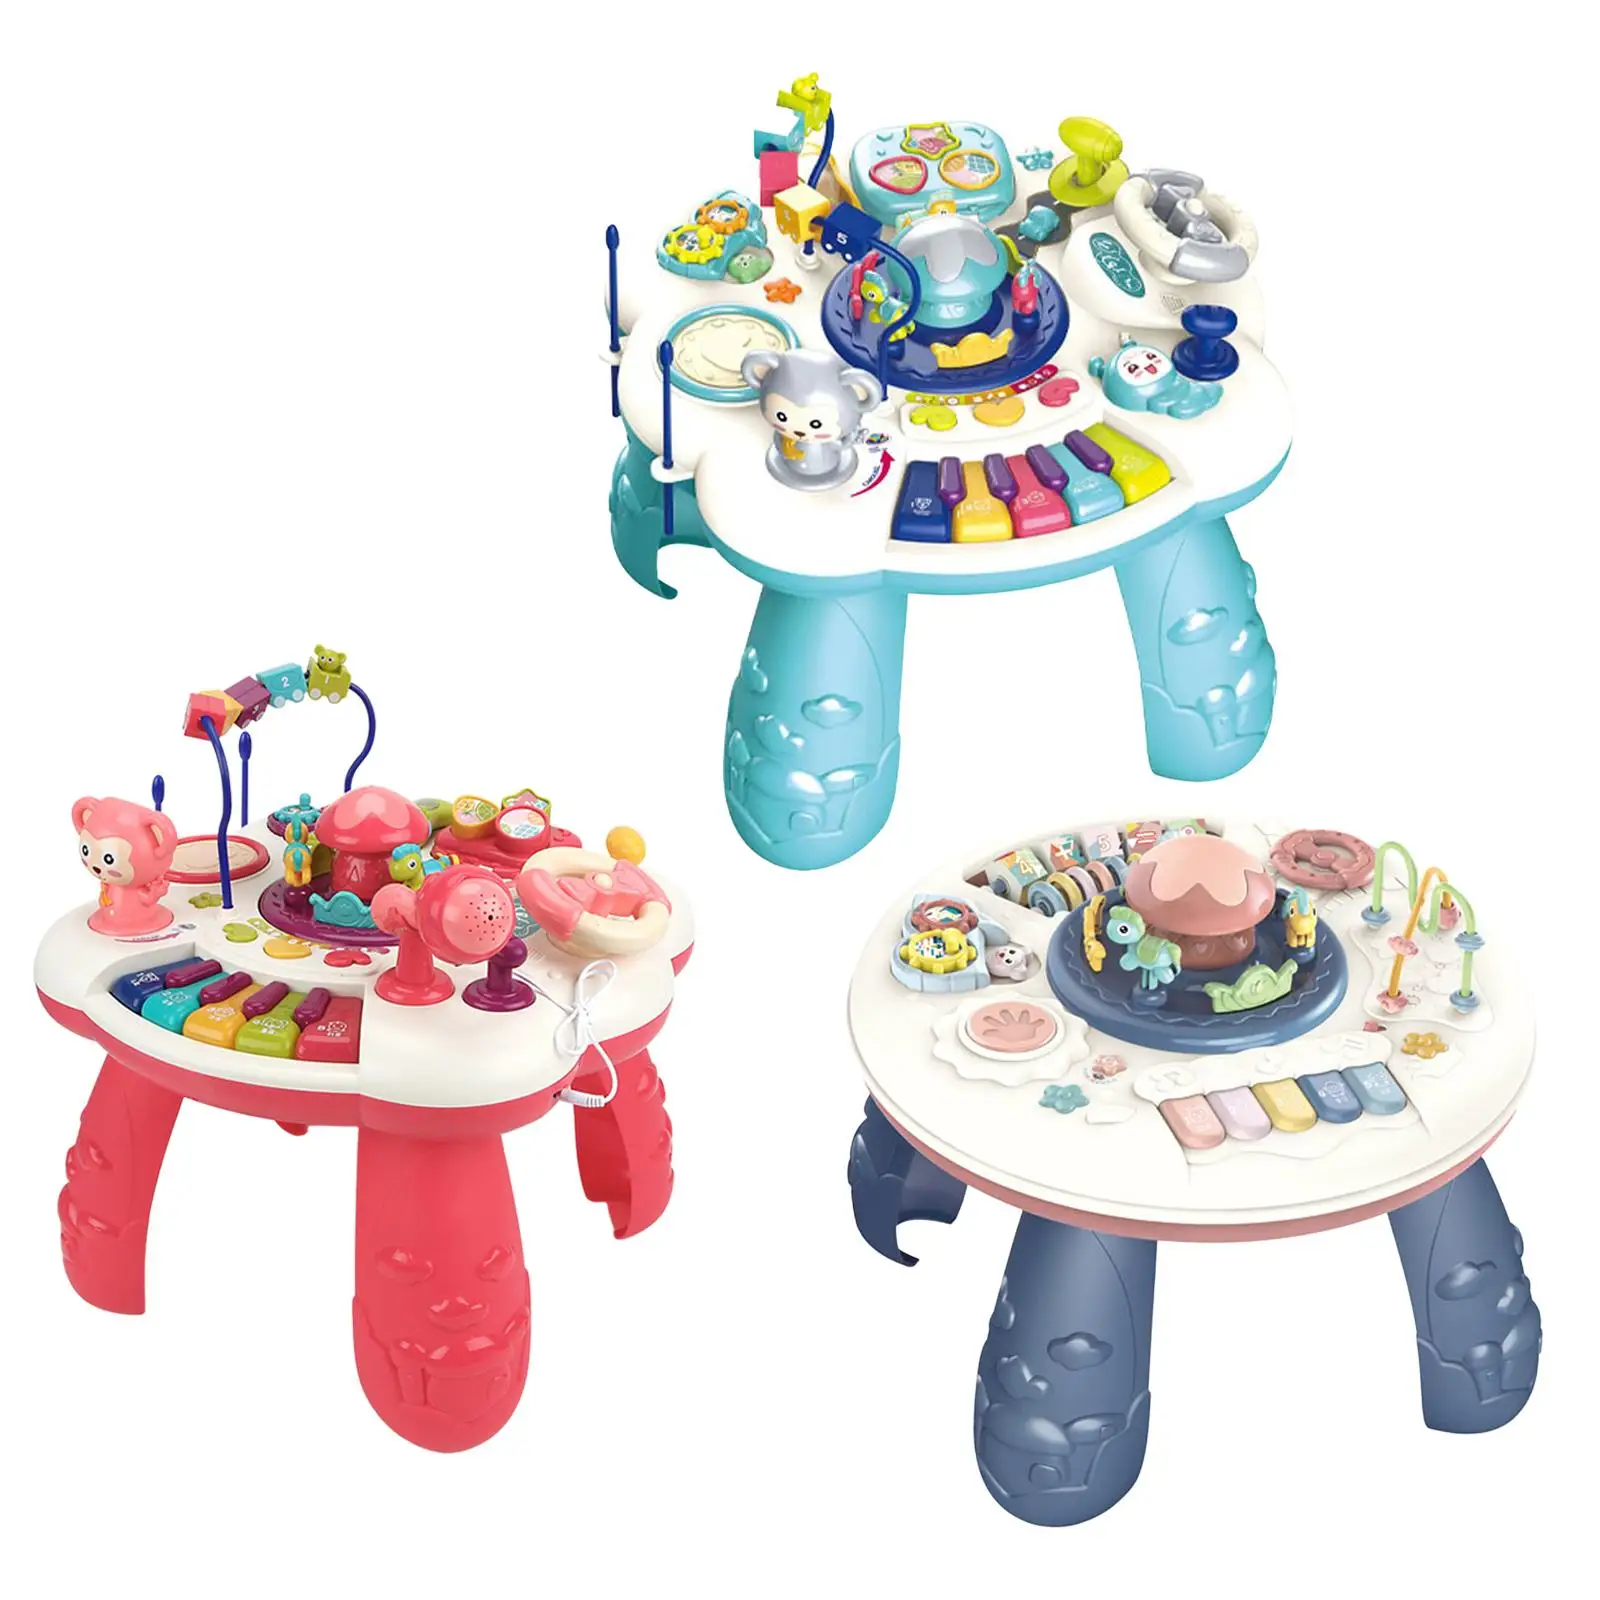 Portable Musical Learning Activity Table Cute Early Development for Kids